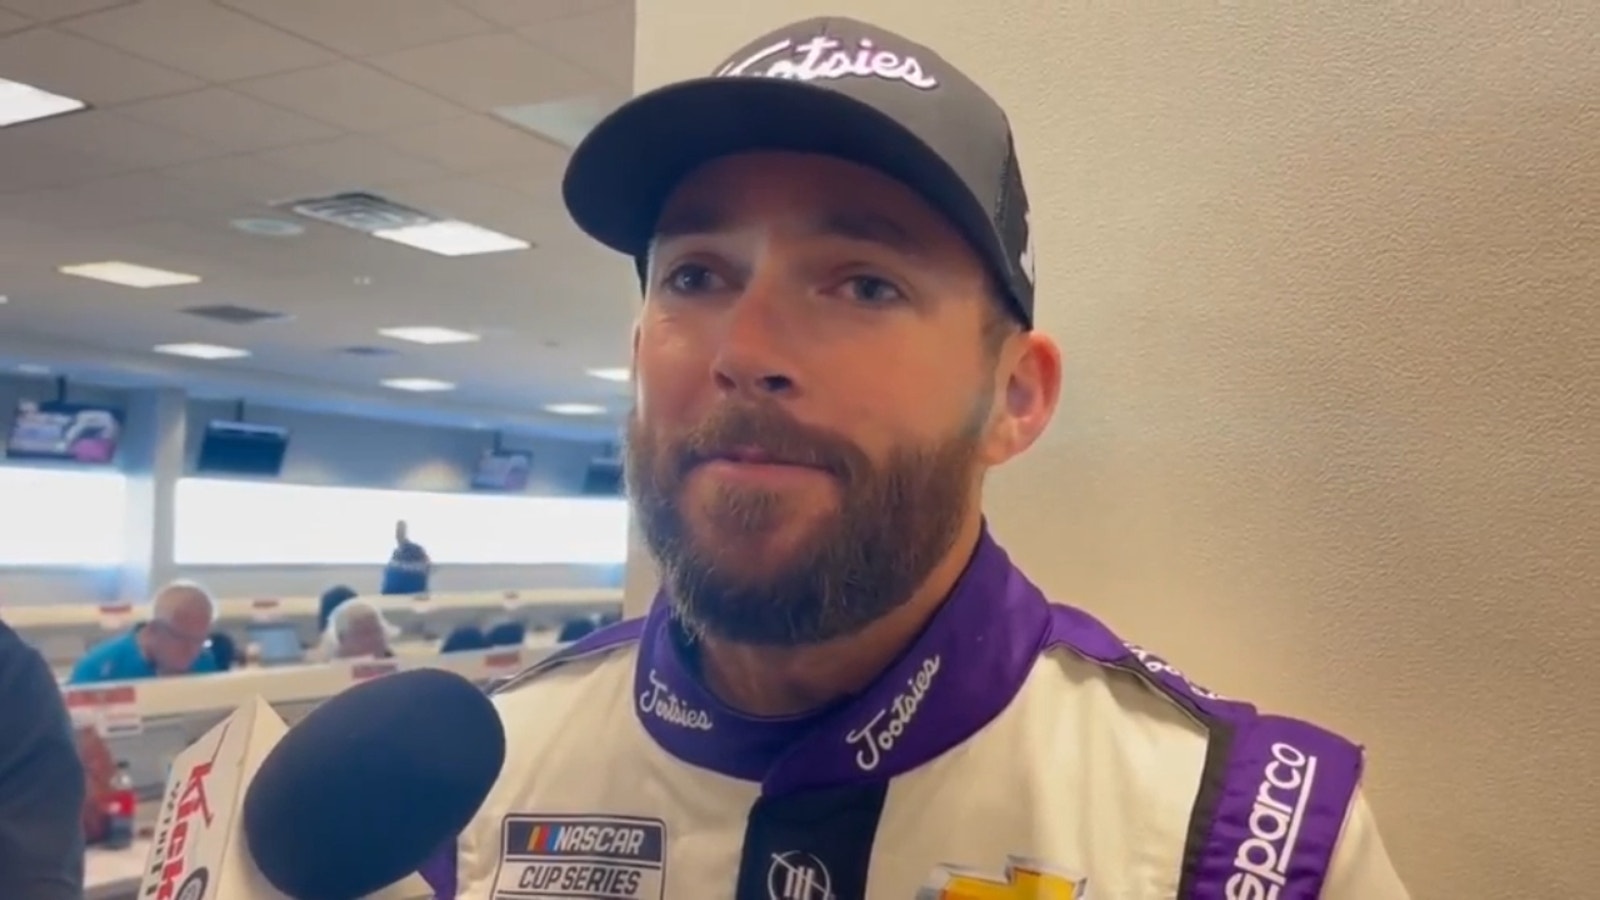 Ross Chastain on his underdog performance this season